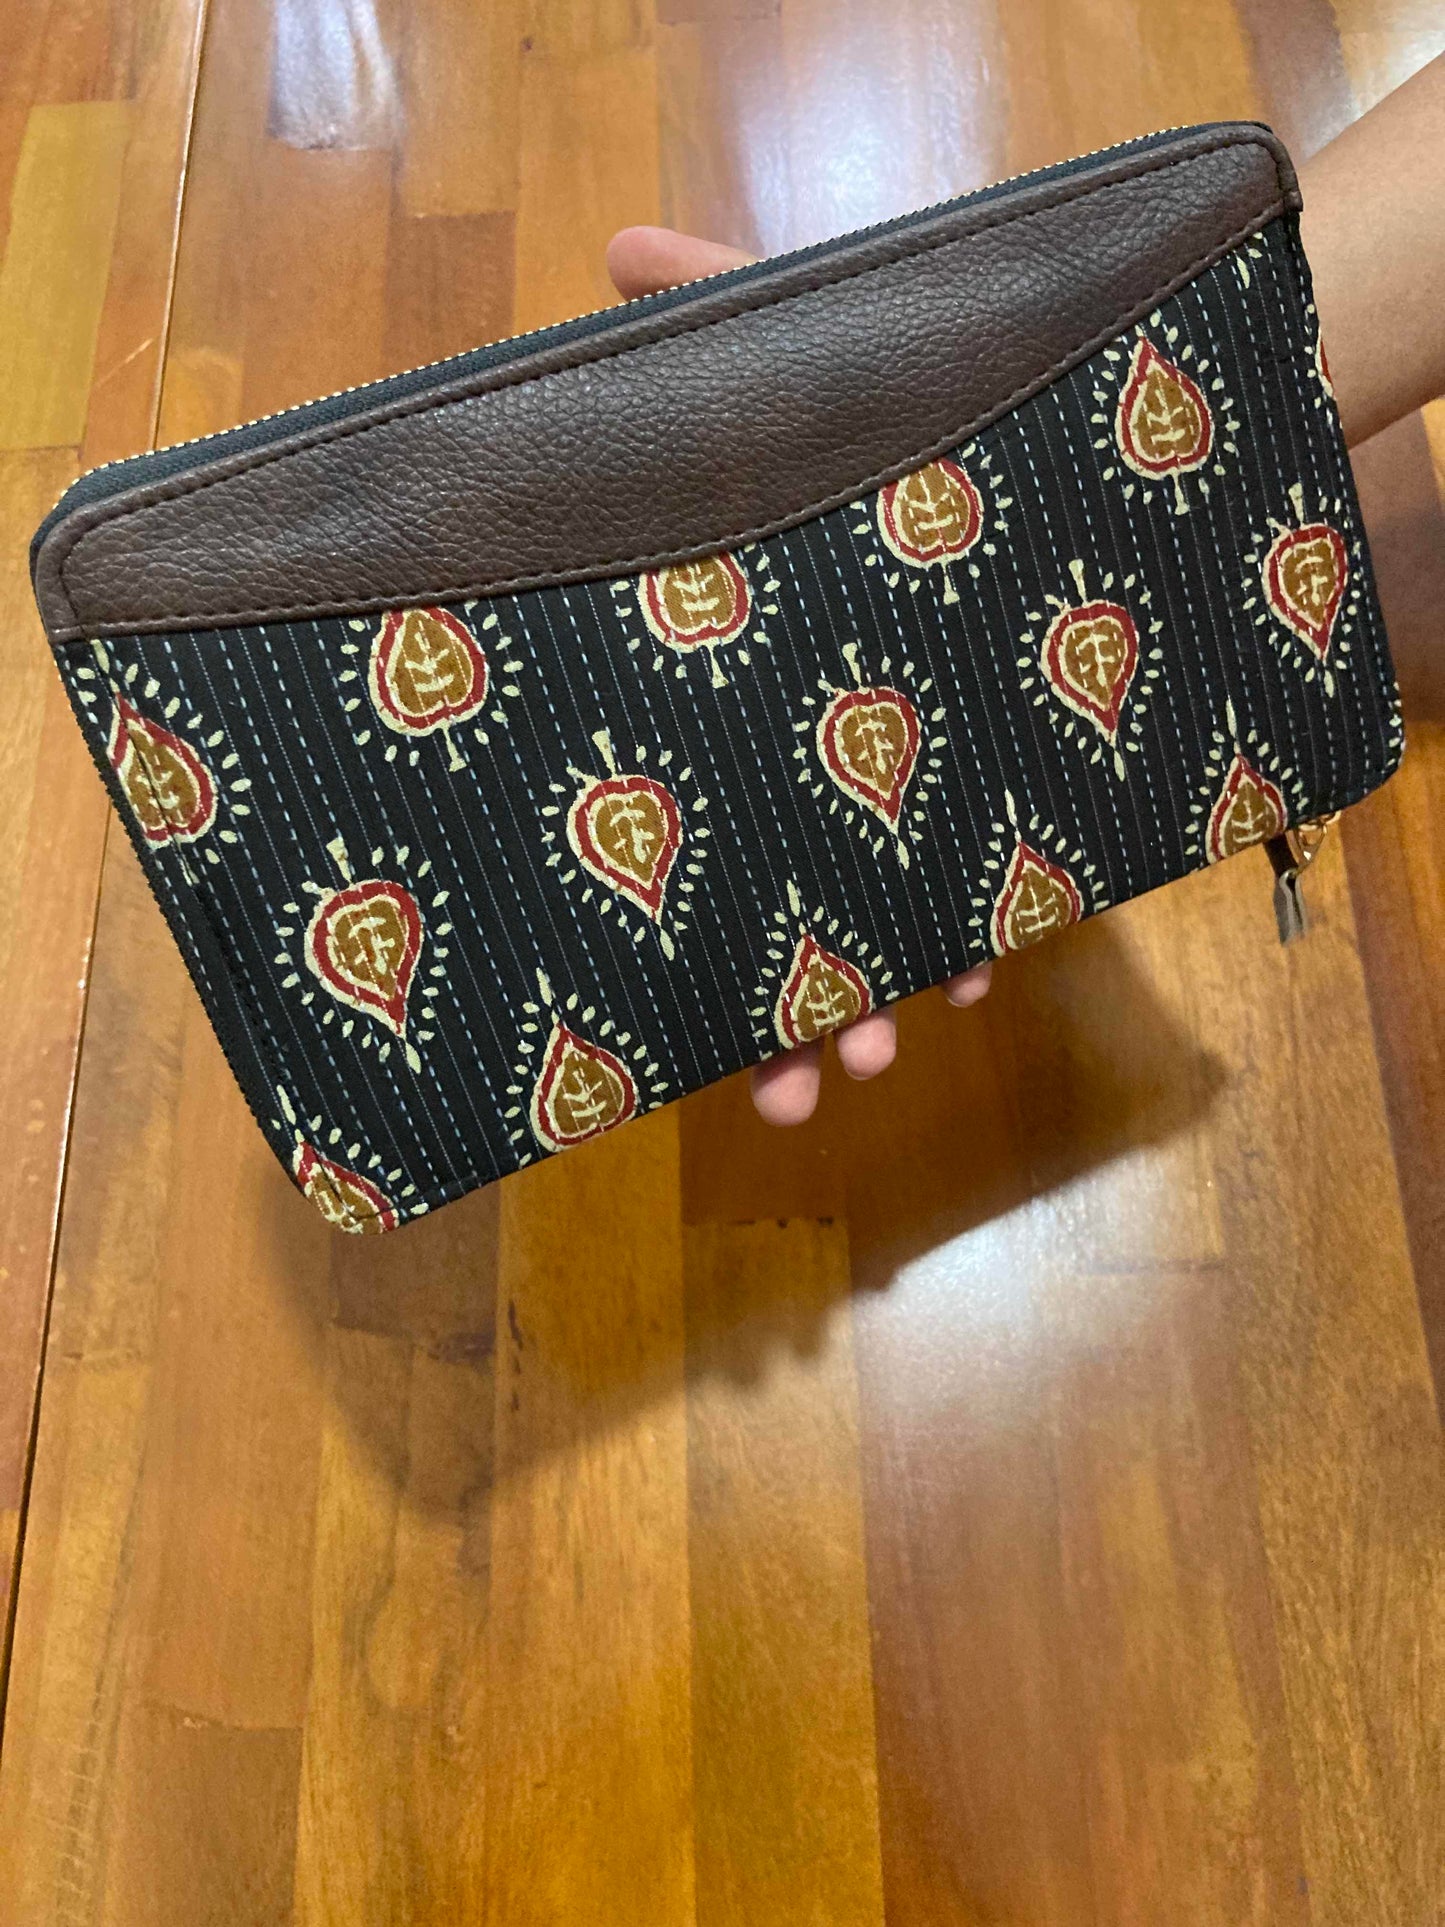 Southloom™ Handmade Purse with Black Jacquard Cloth and Leatherette